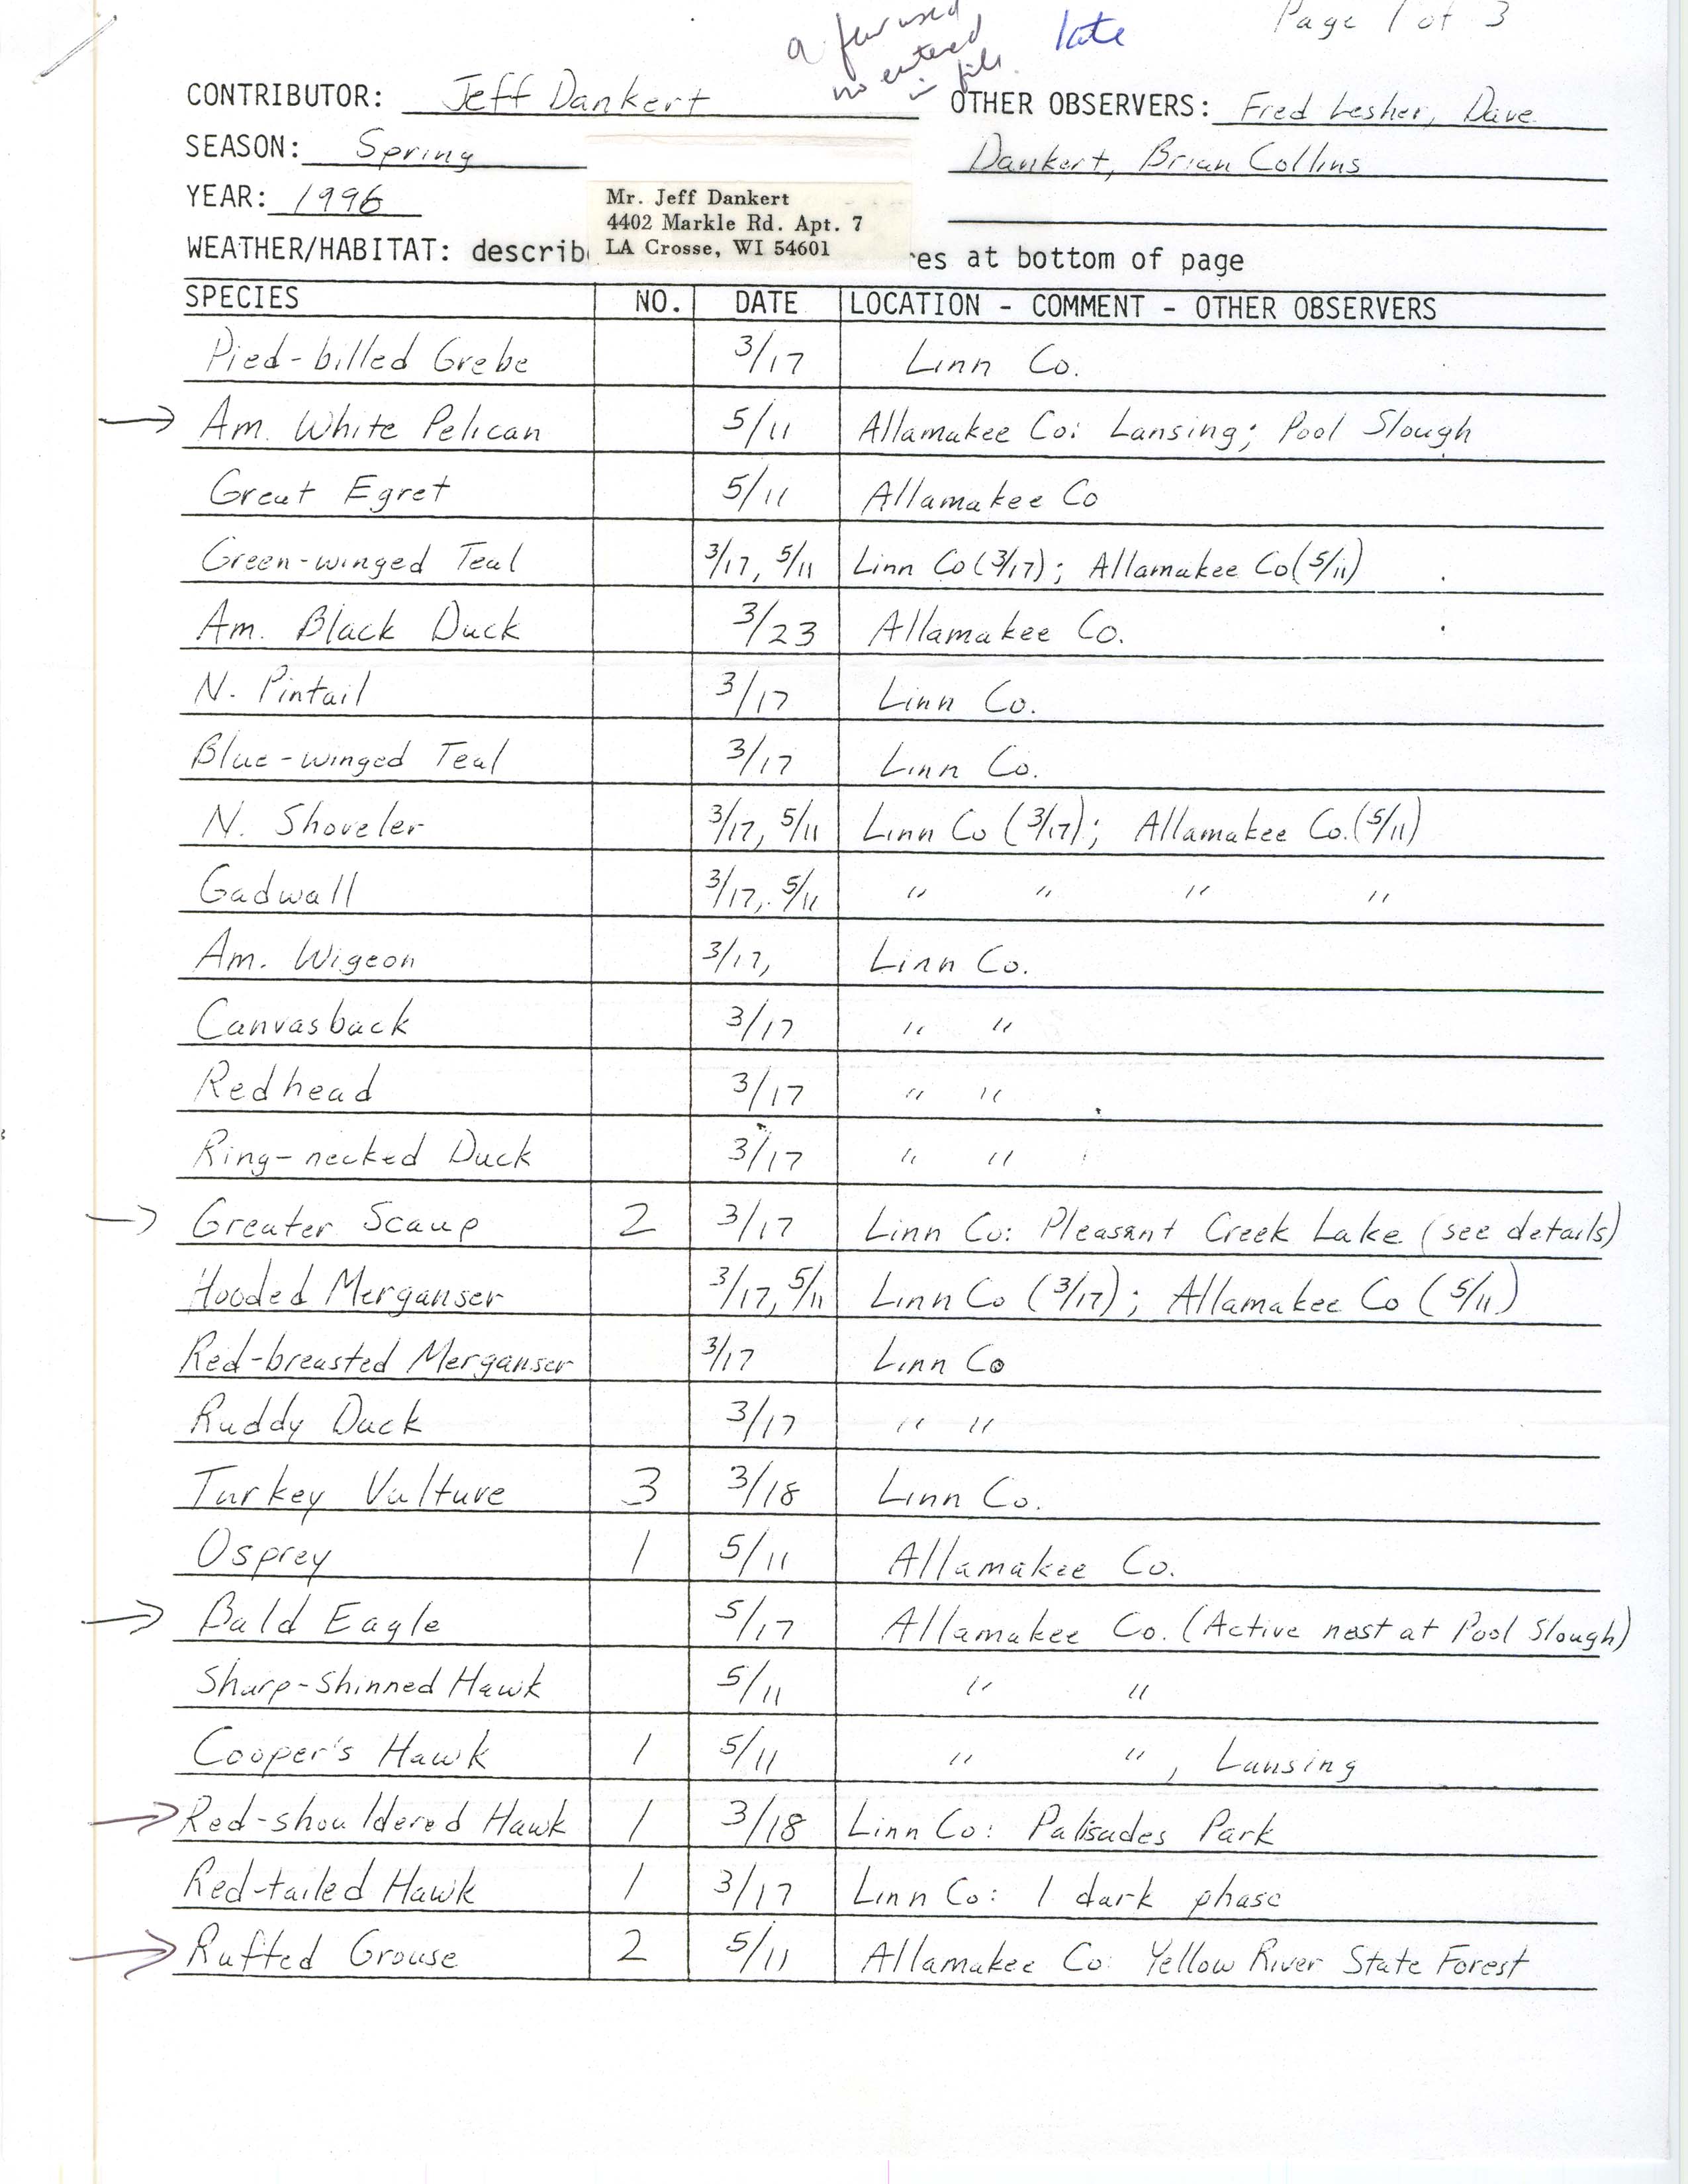 Field notes contributed by Jeffrey B. Dankert, spring 1996